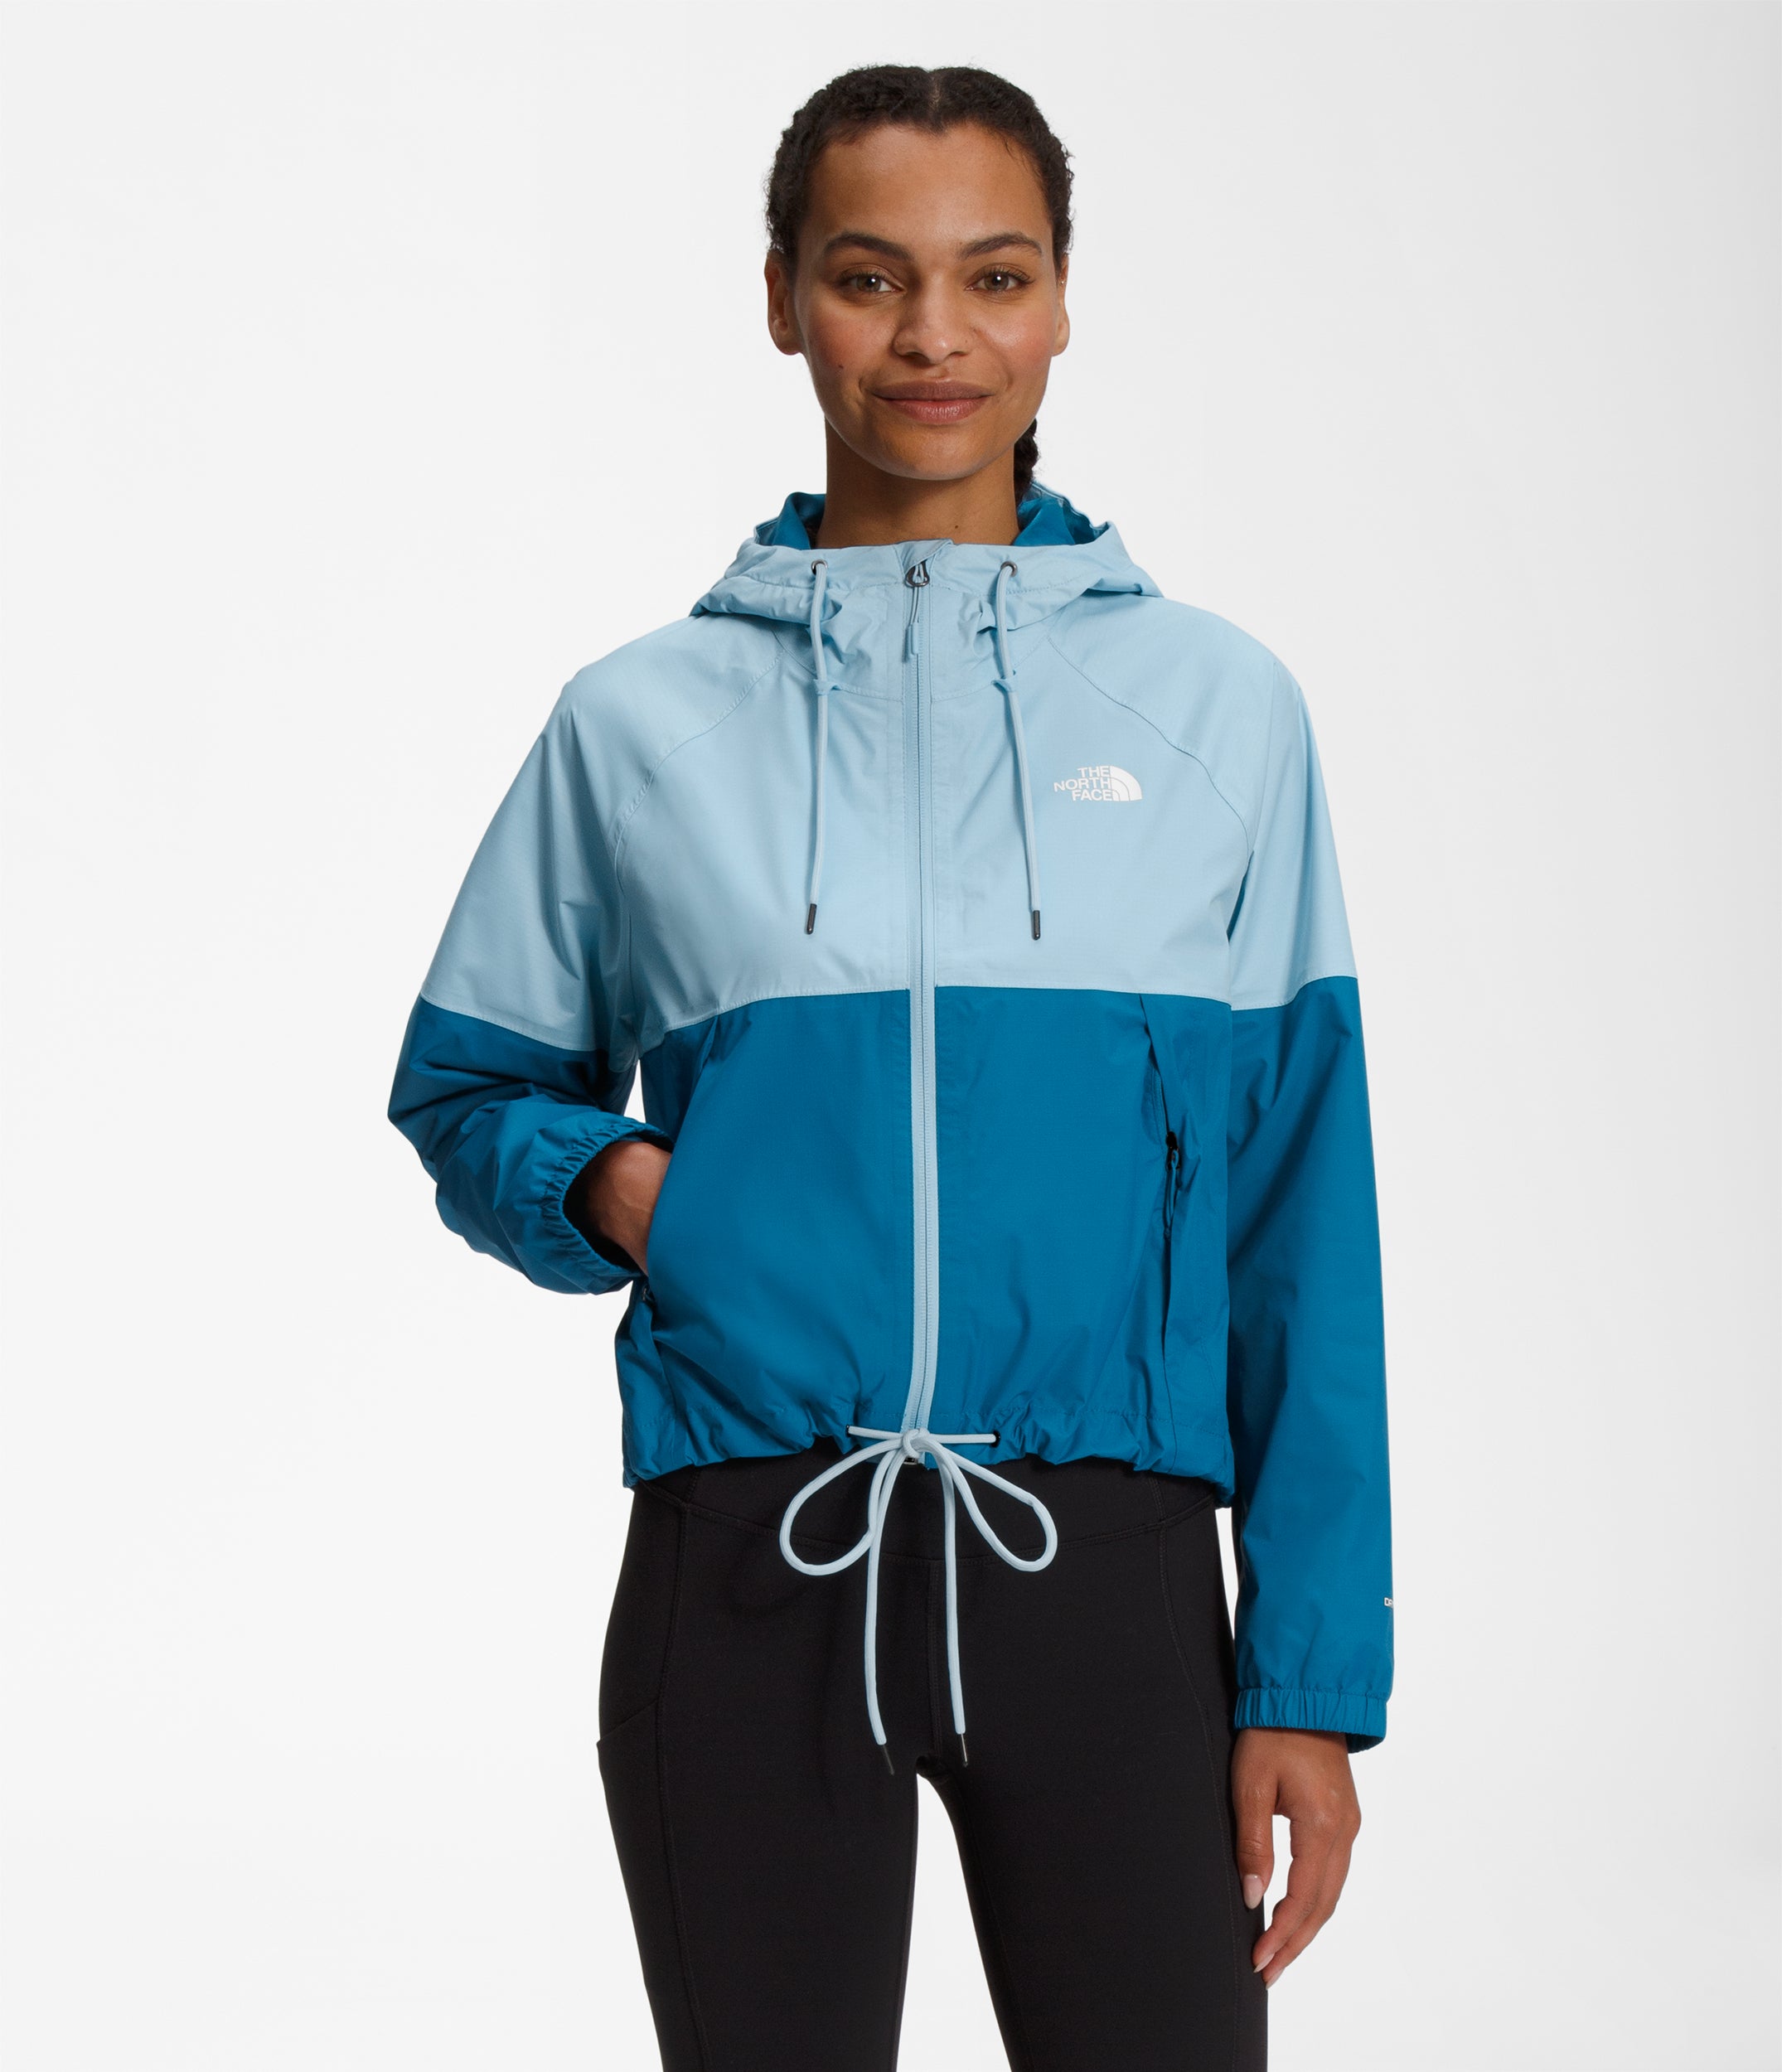 The North Face Antora - Women's Review